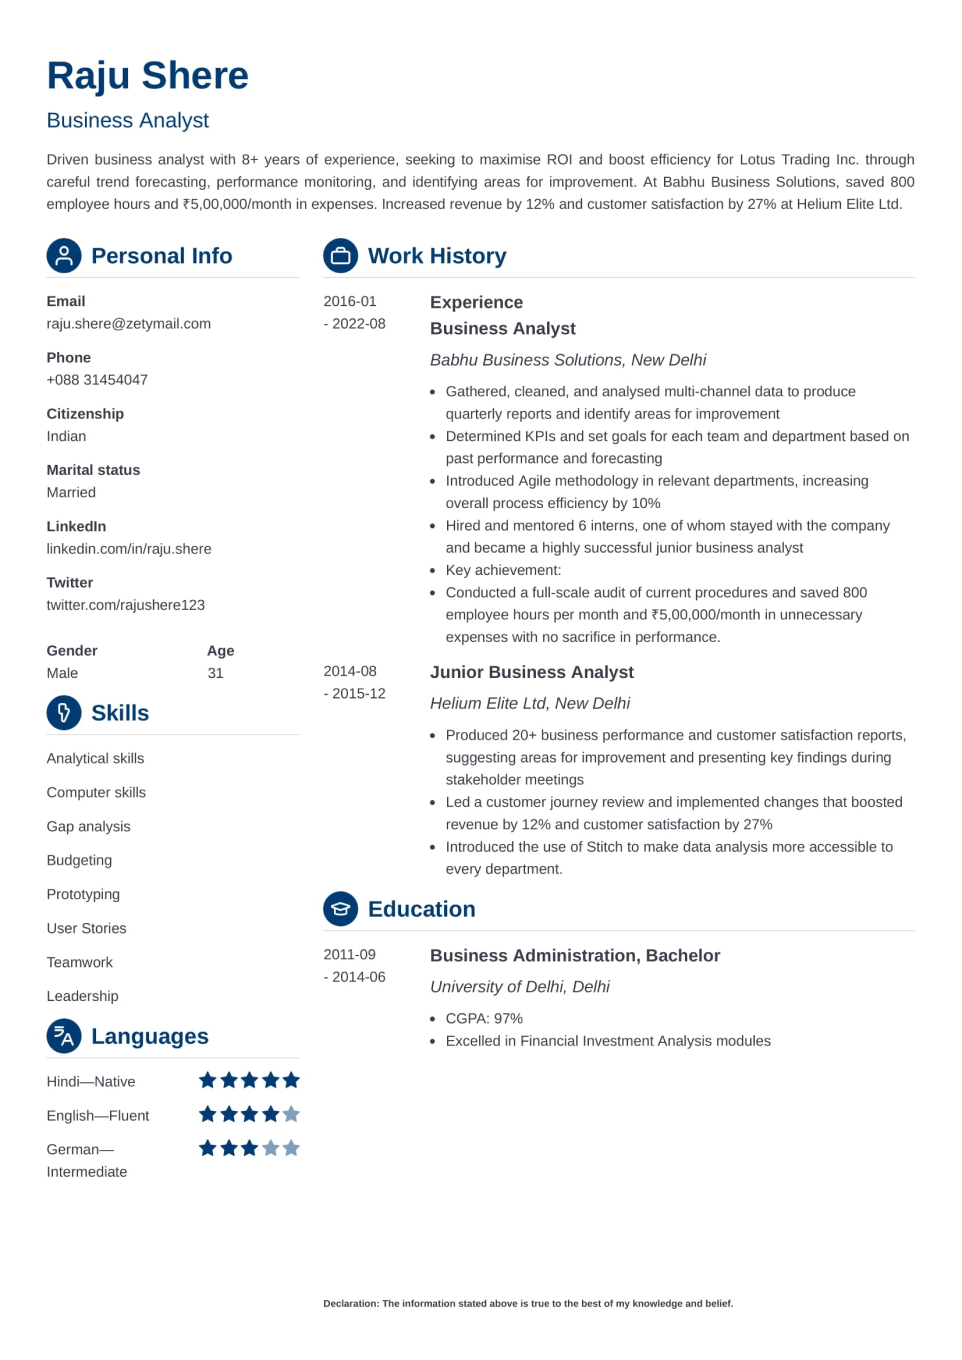 Online Resume Maker: Build a Professional Resume in Minutes